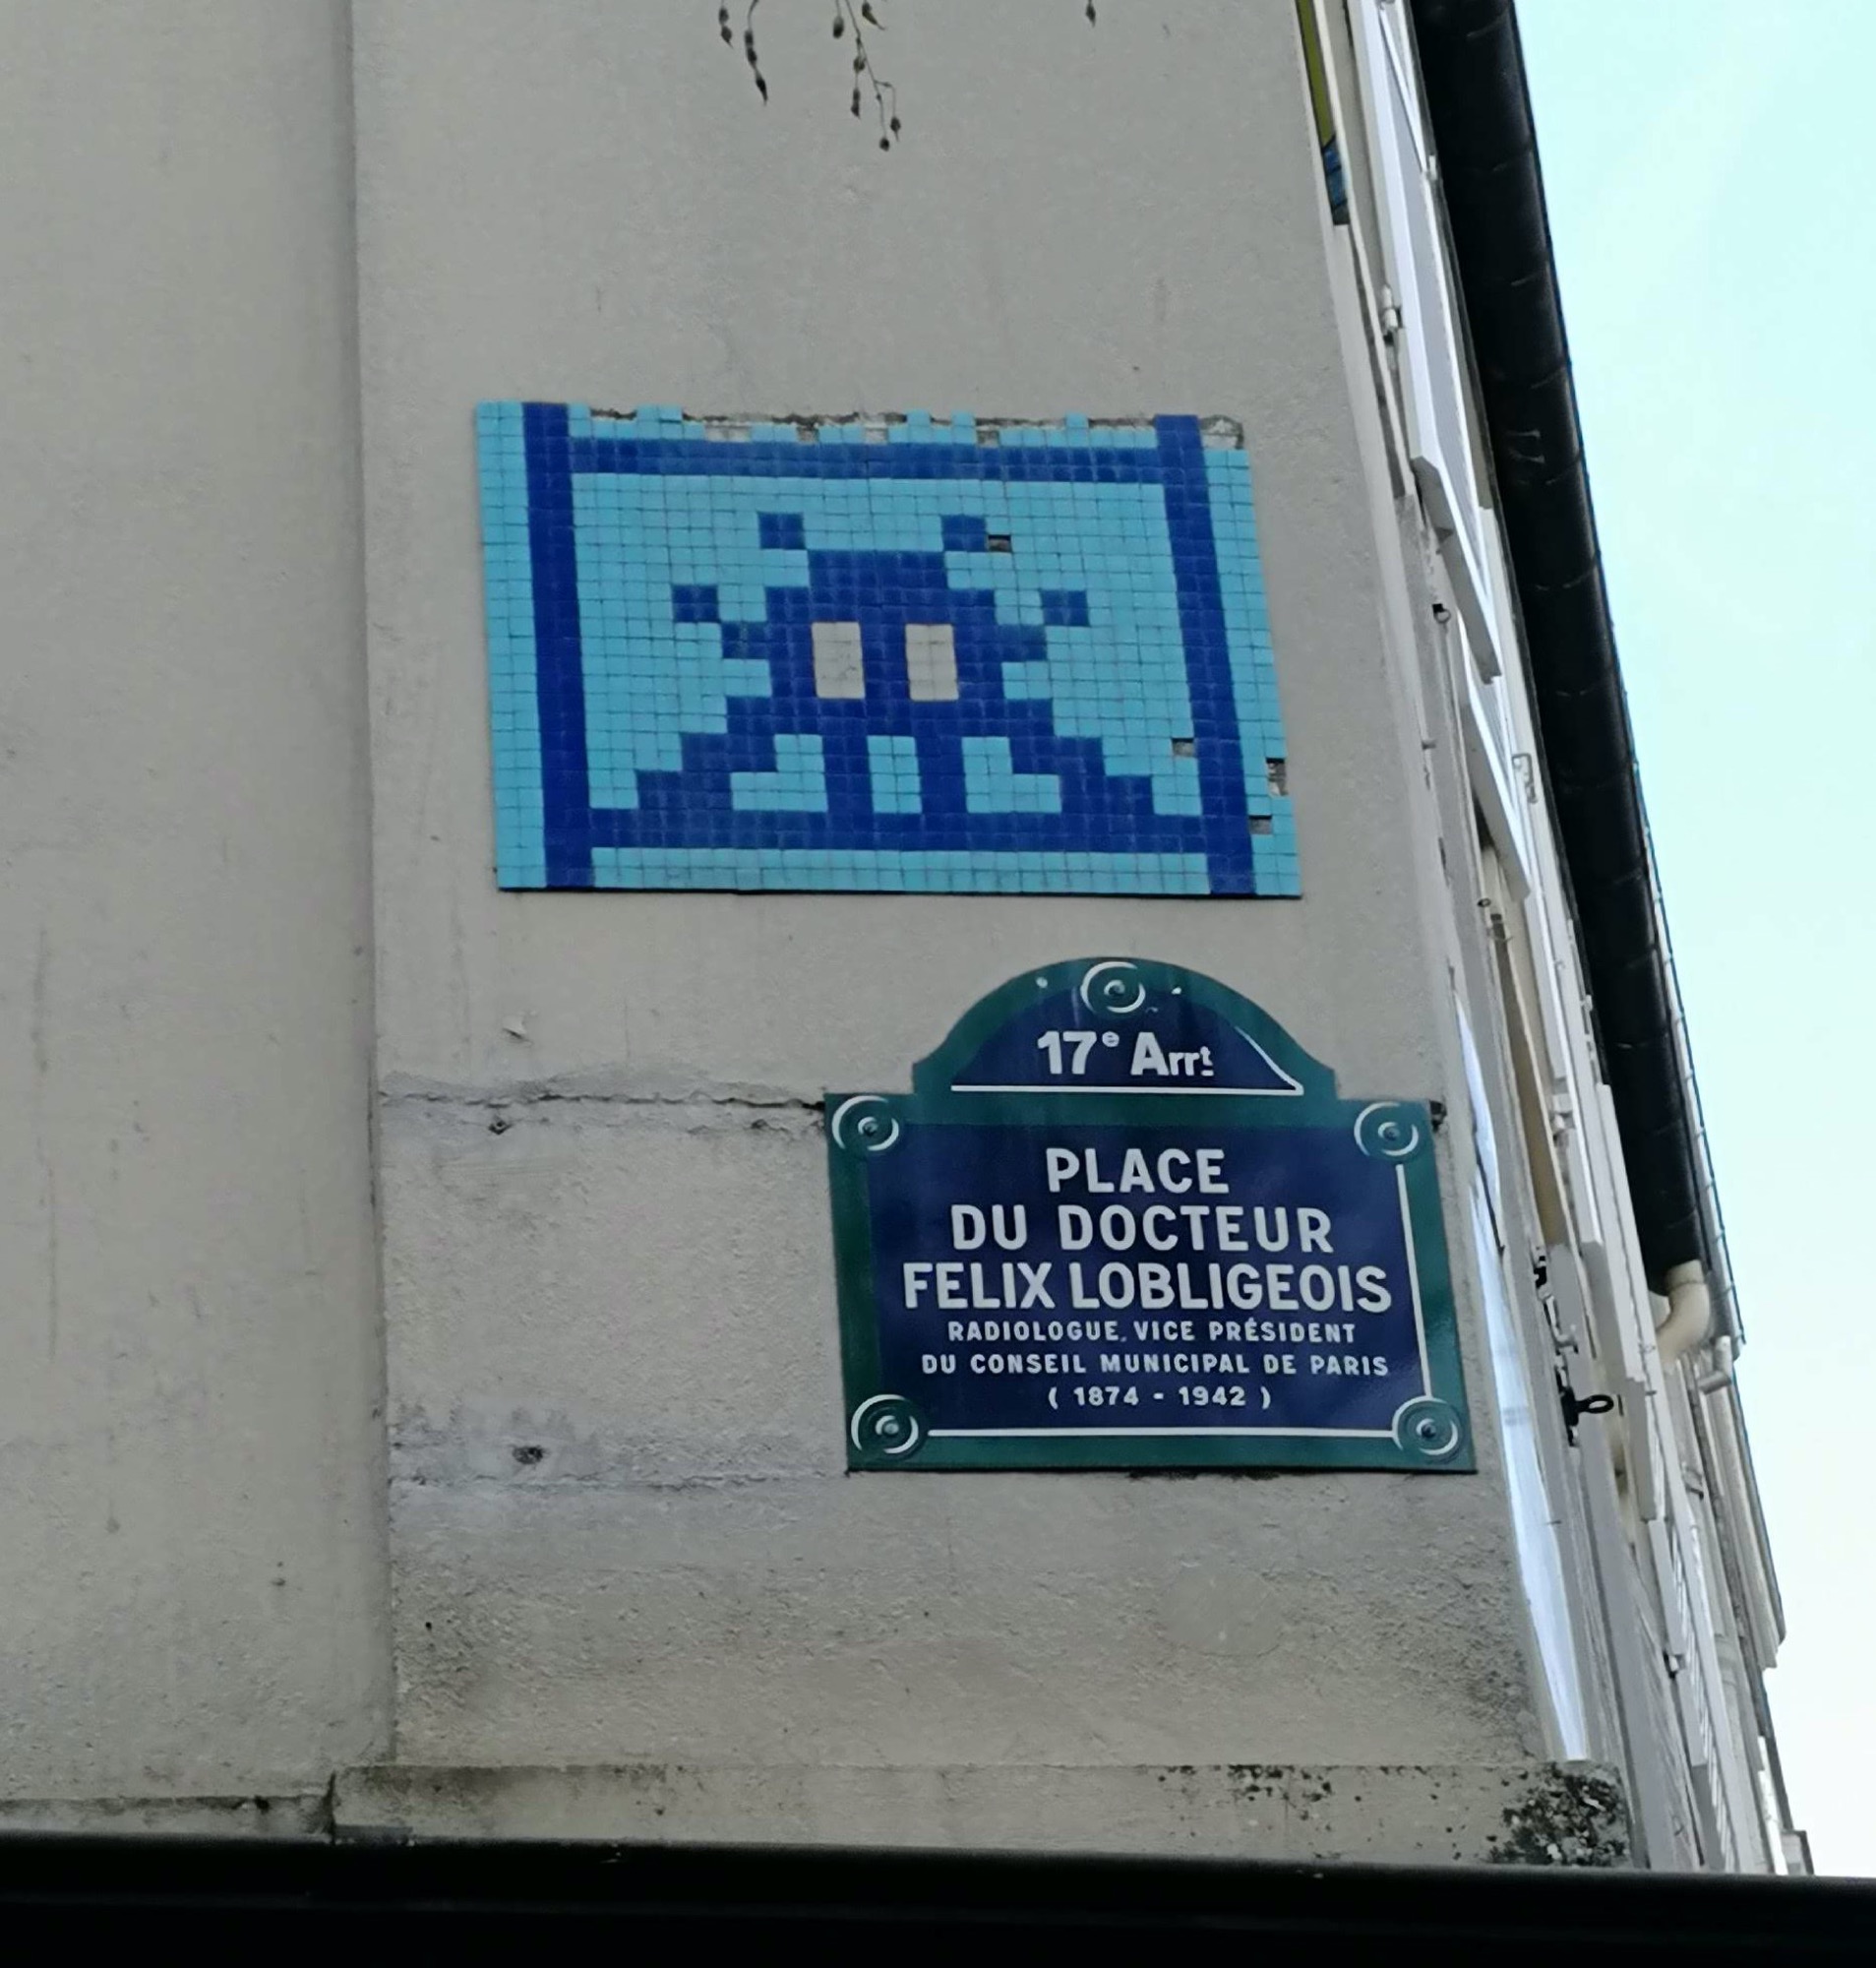 Mosaic 633  by the artist Invader captured by Rabot in Paris France